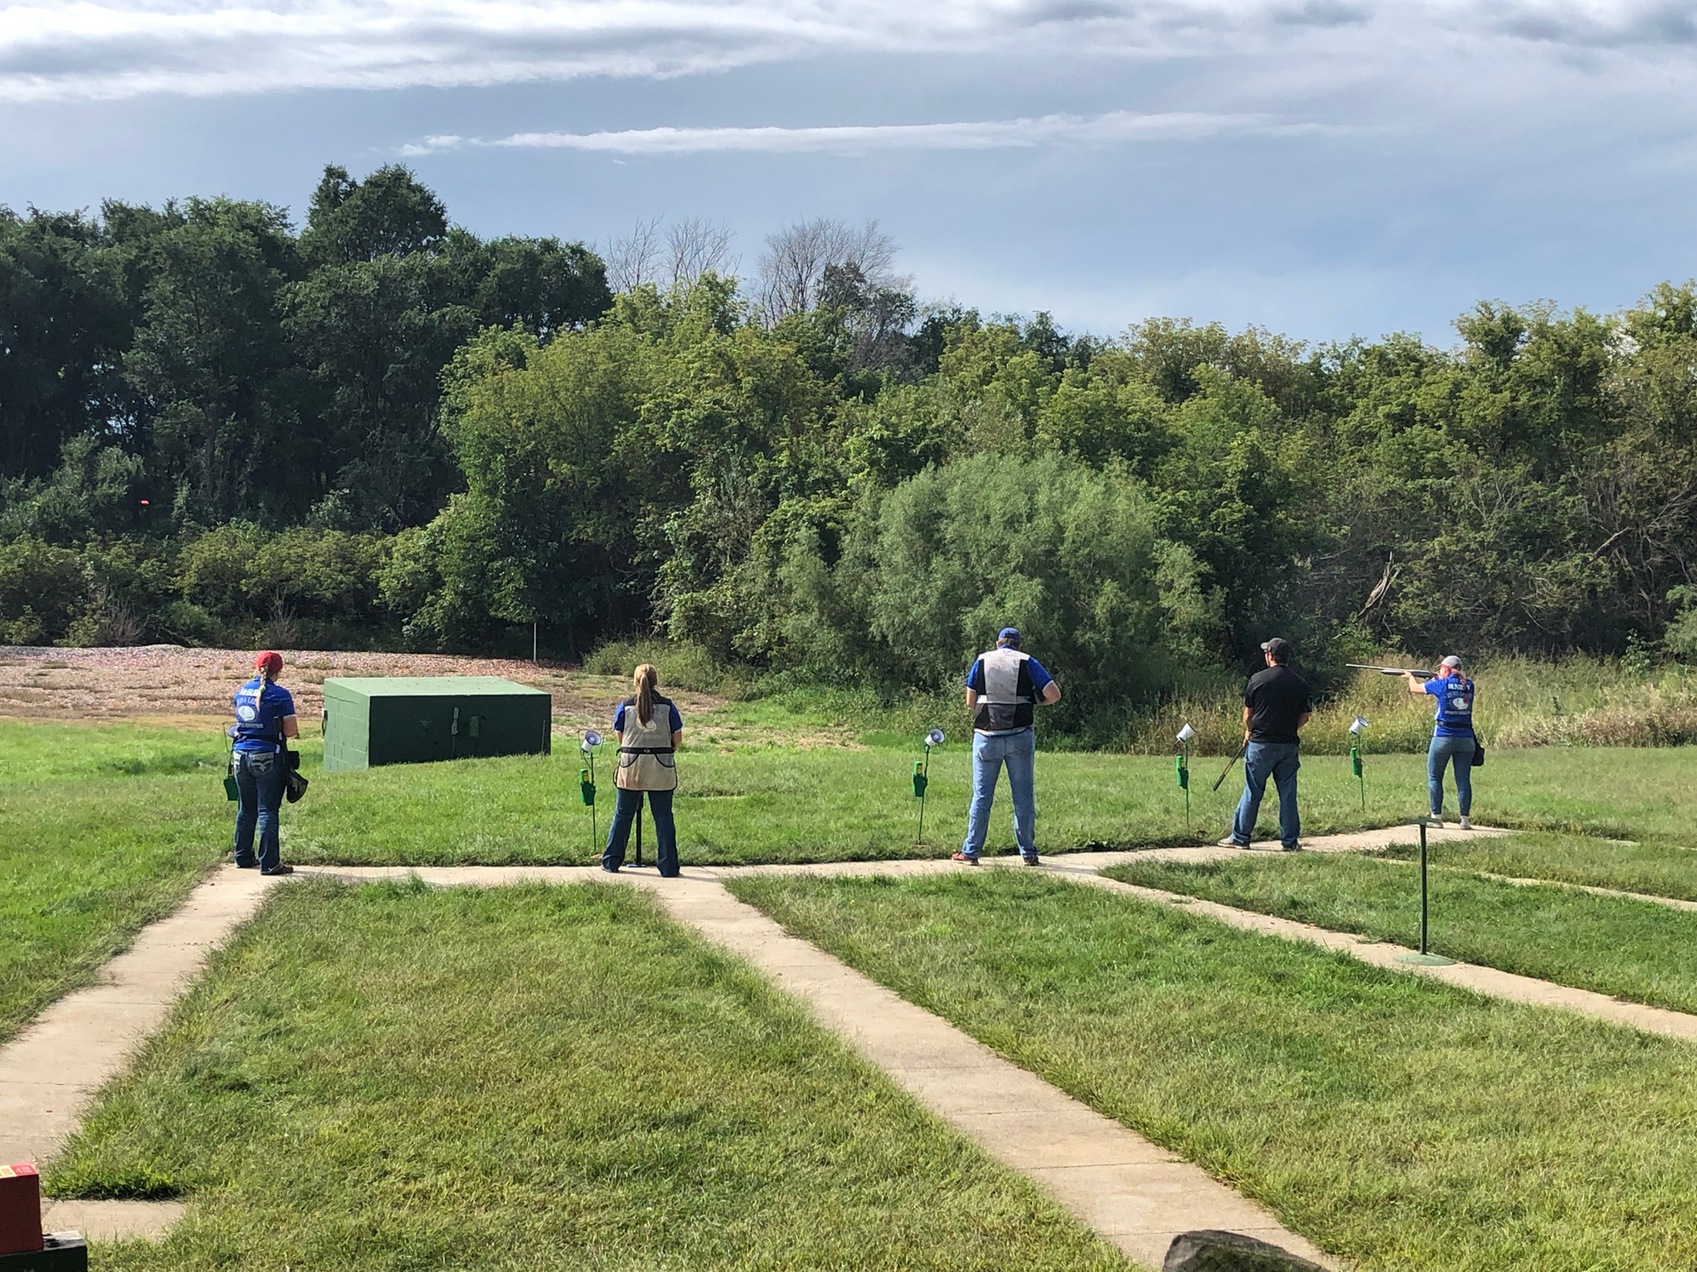 Iowa Lakes Sports Shooting Places 7th at the 2021 Collegiate Championship